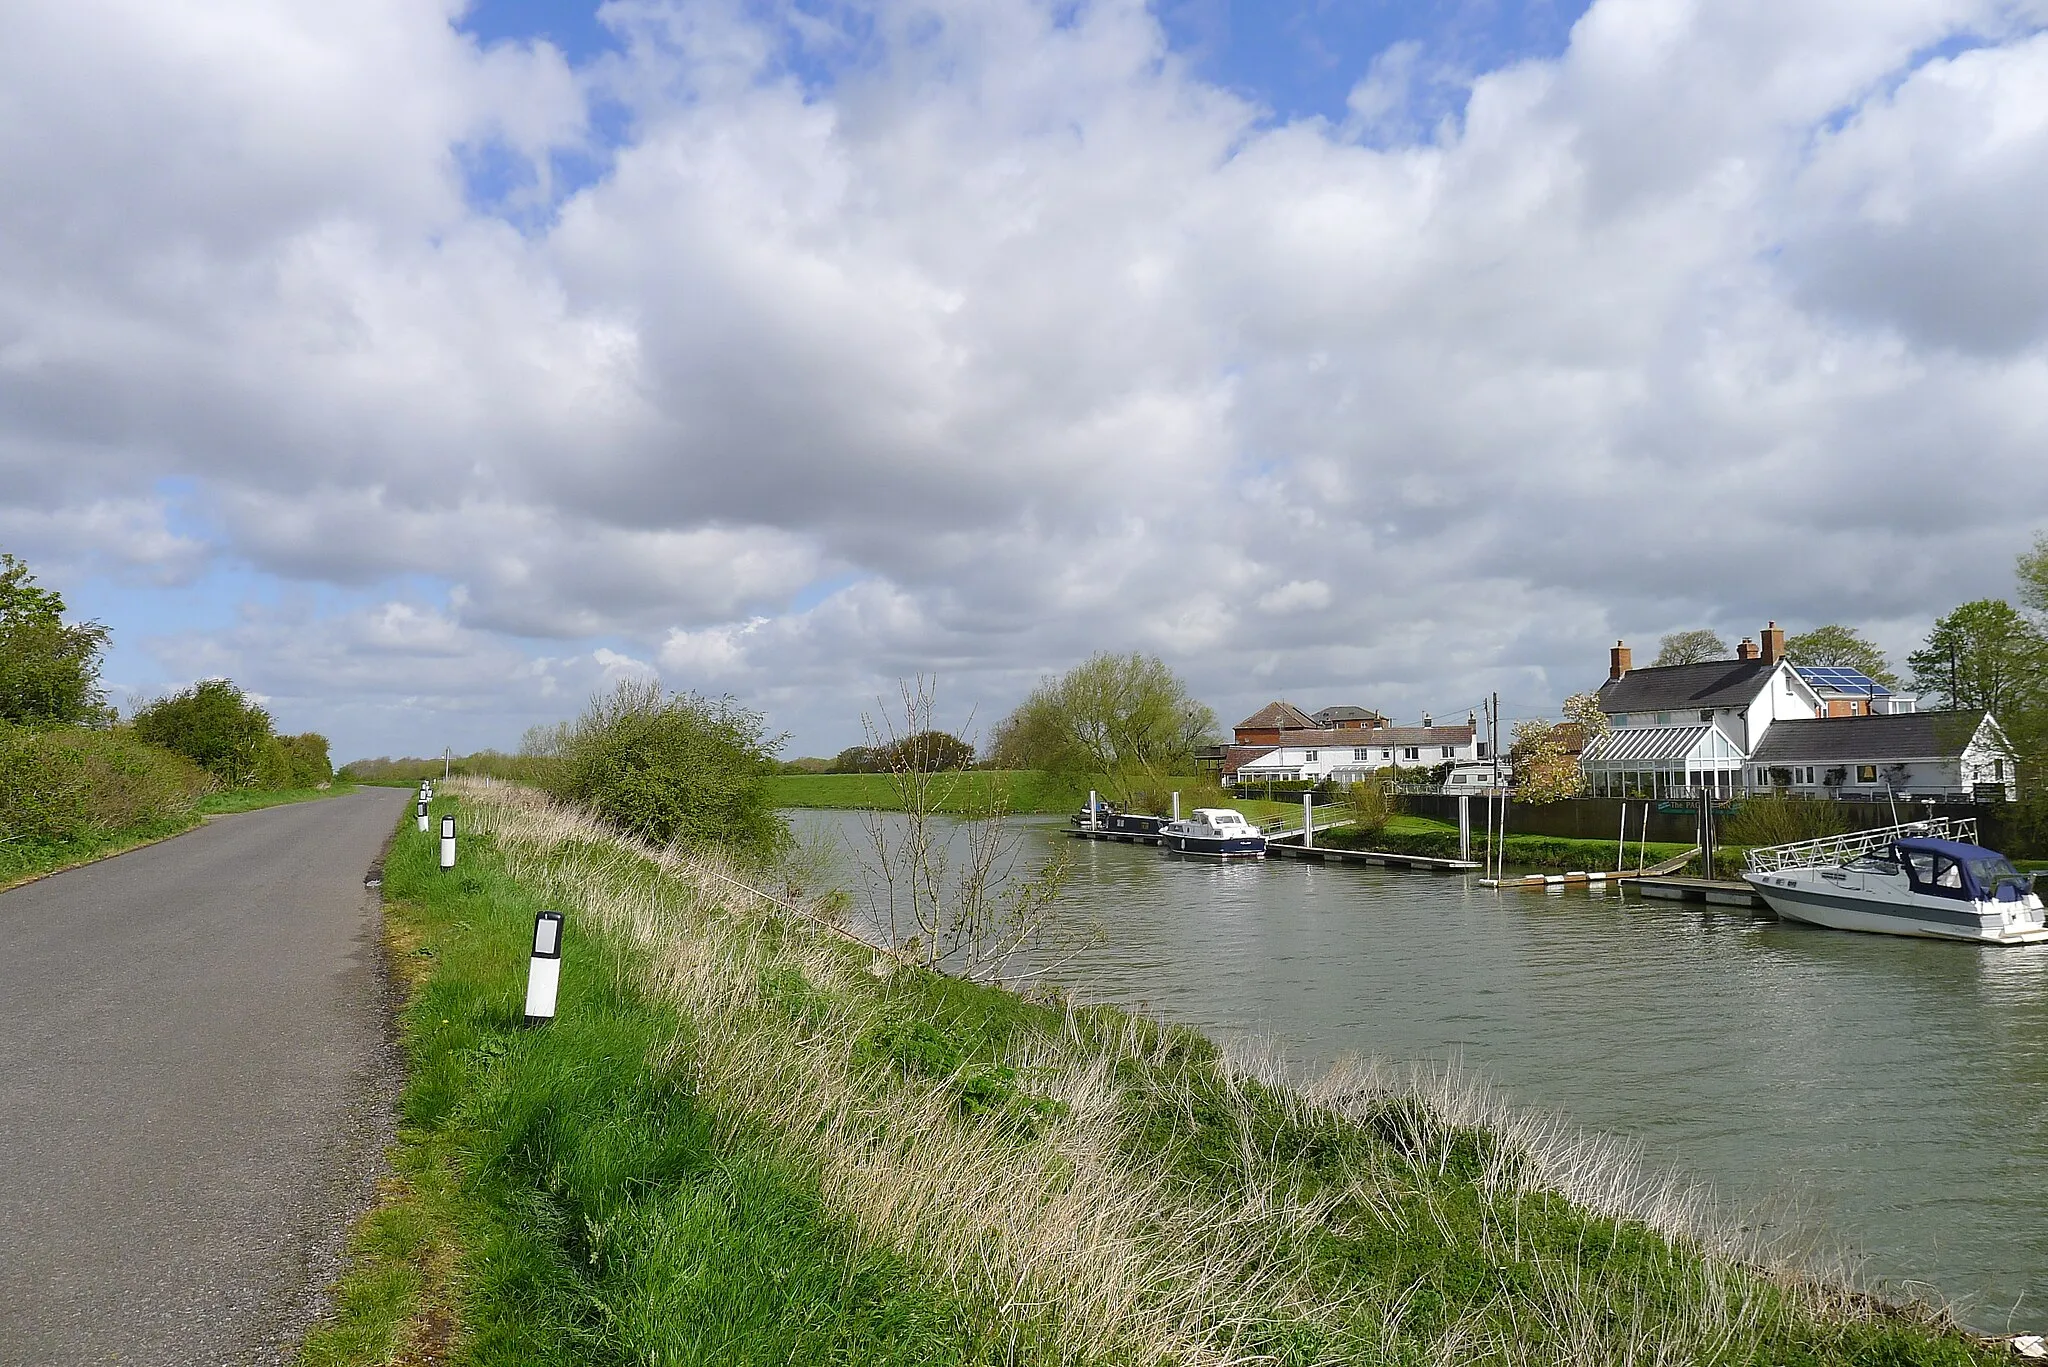 Photo showing: Dogdyke. The River Bain, which rises in the Lincolnshire Wolds near Ludford, can be seen joining the Witham just beyond the boats.